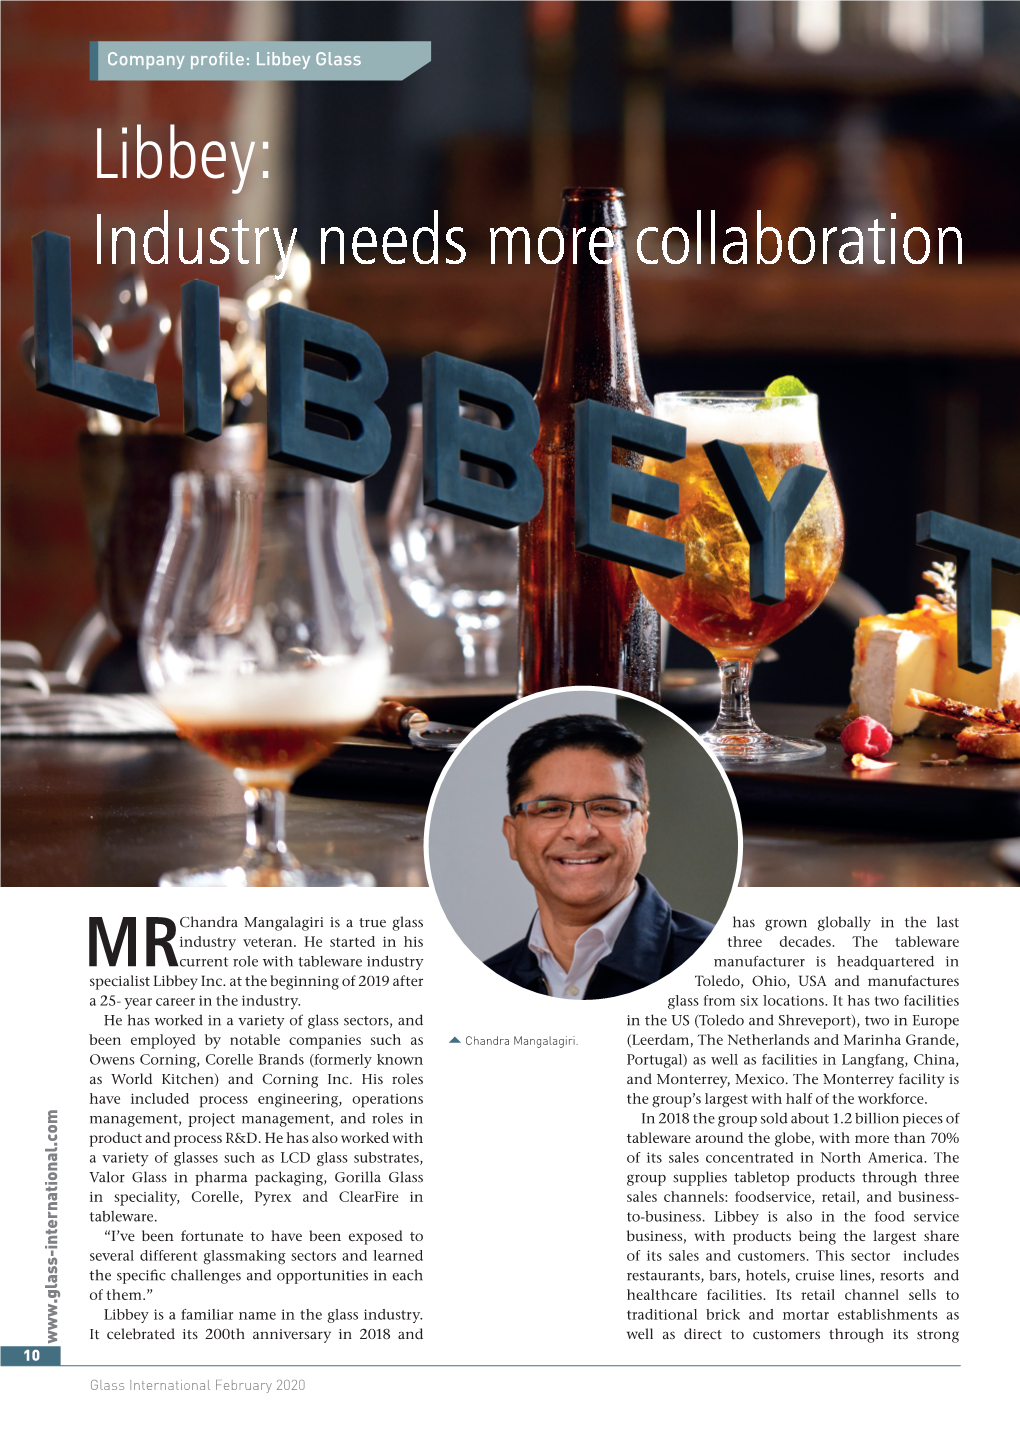 Libbey: Industry Needs More Collaboration